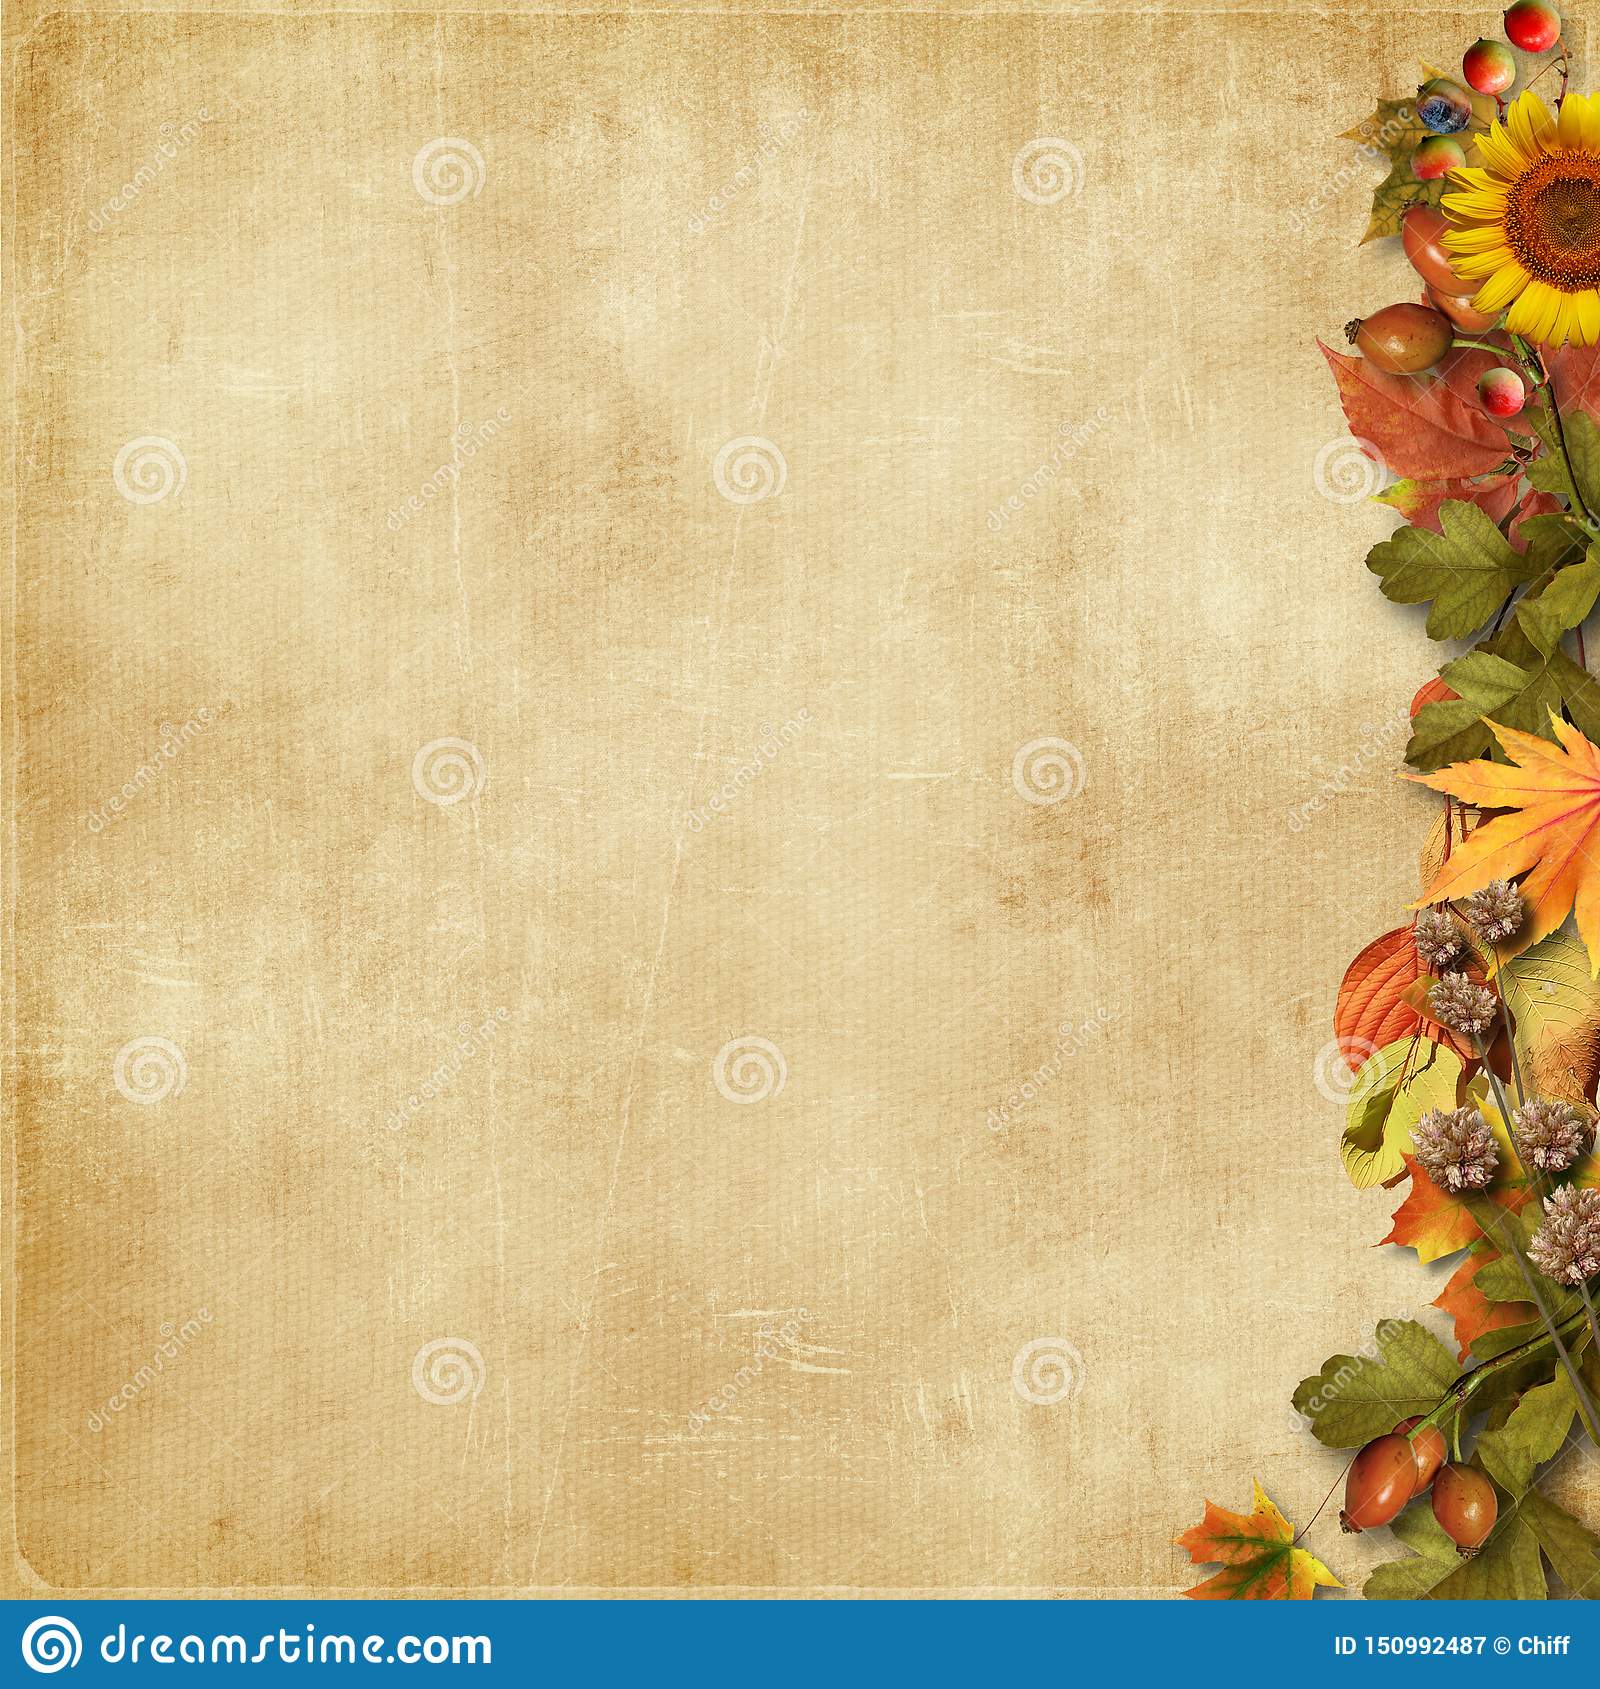 Vintage background with a beautiful border of autumn leaves stock image